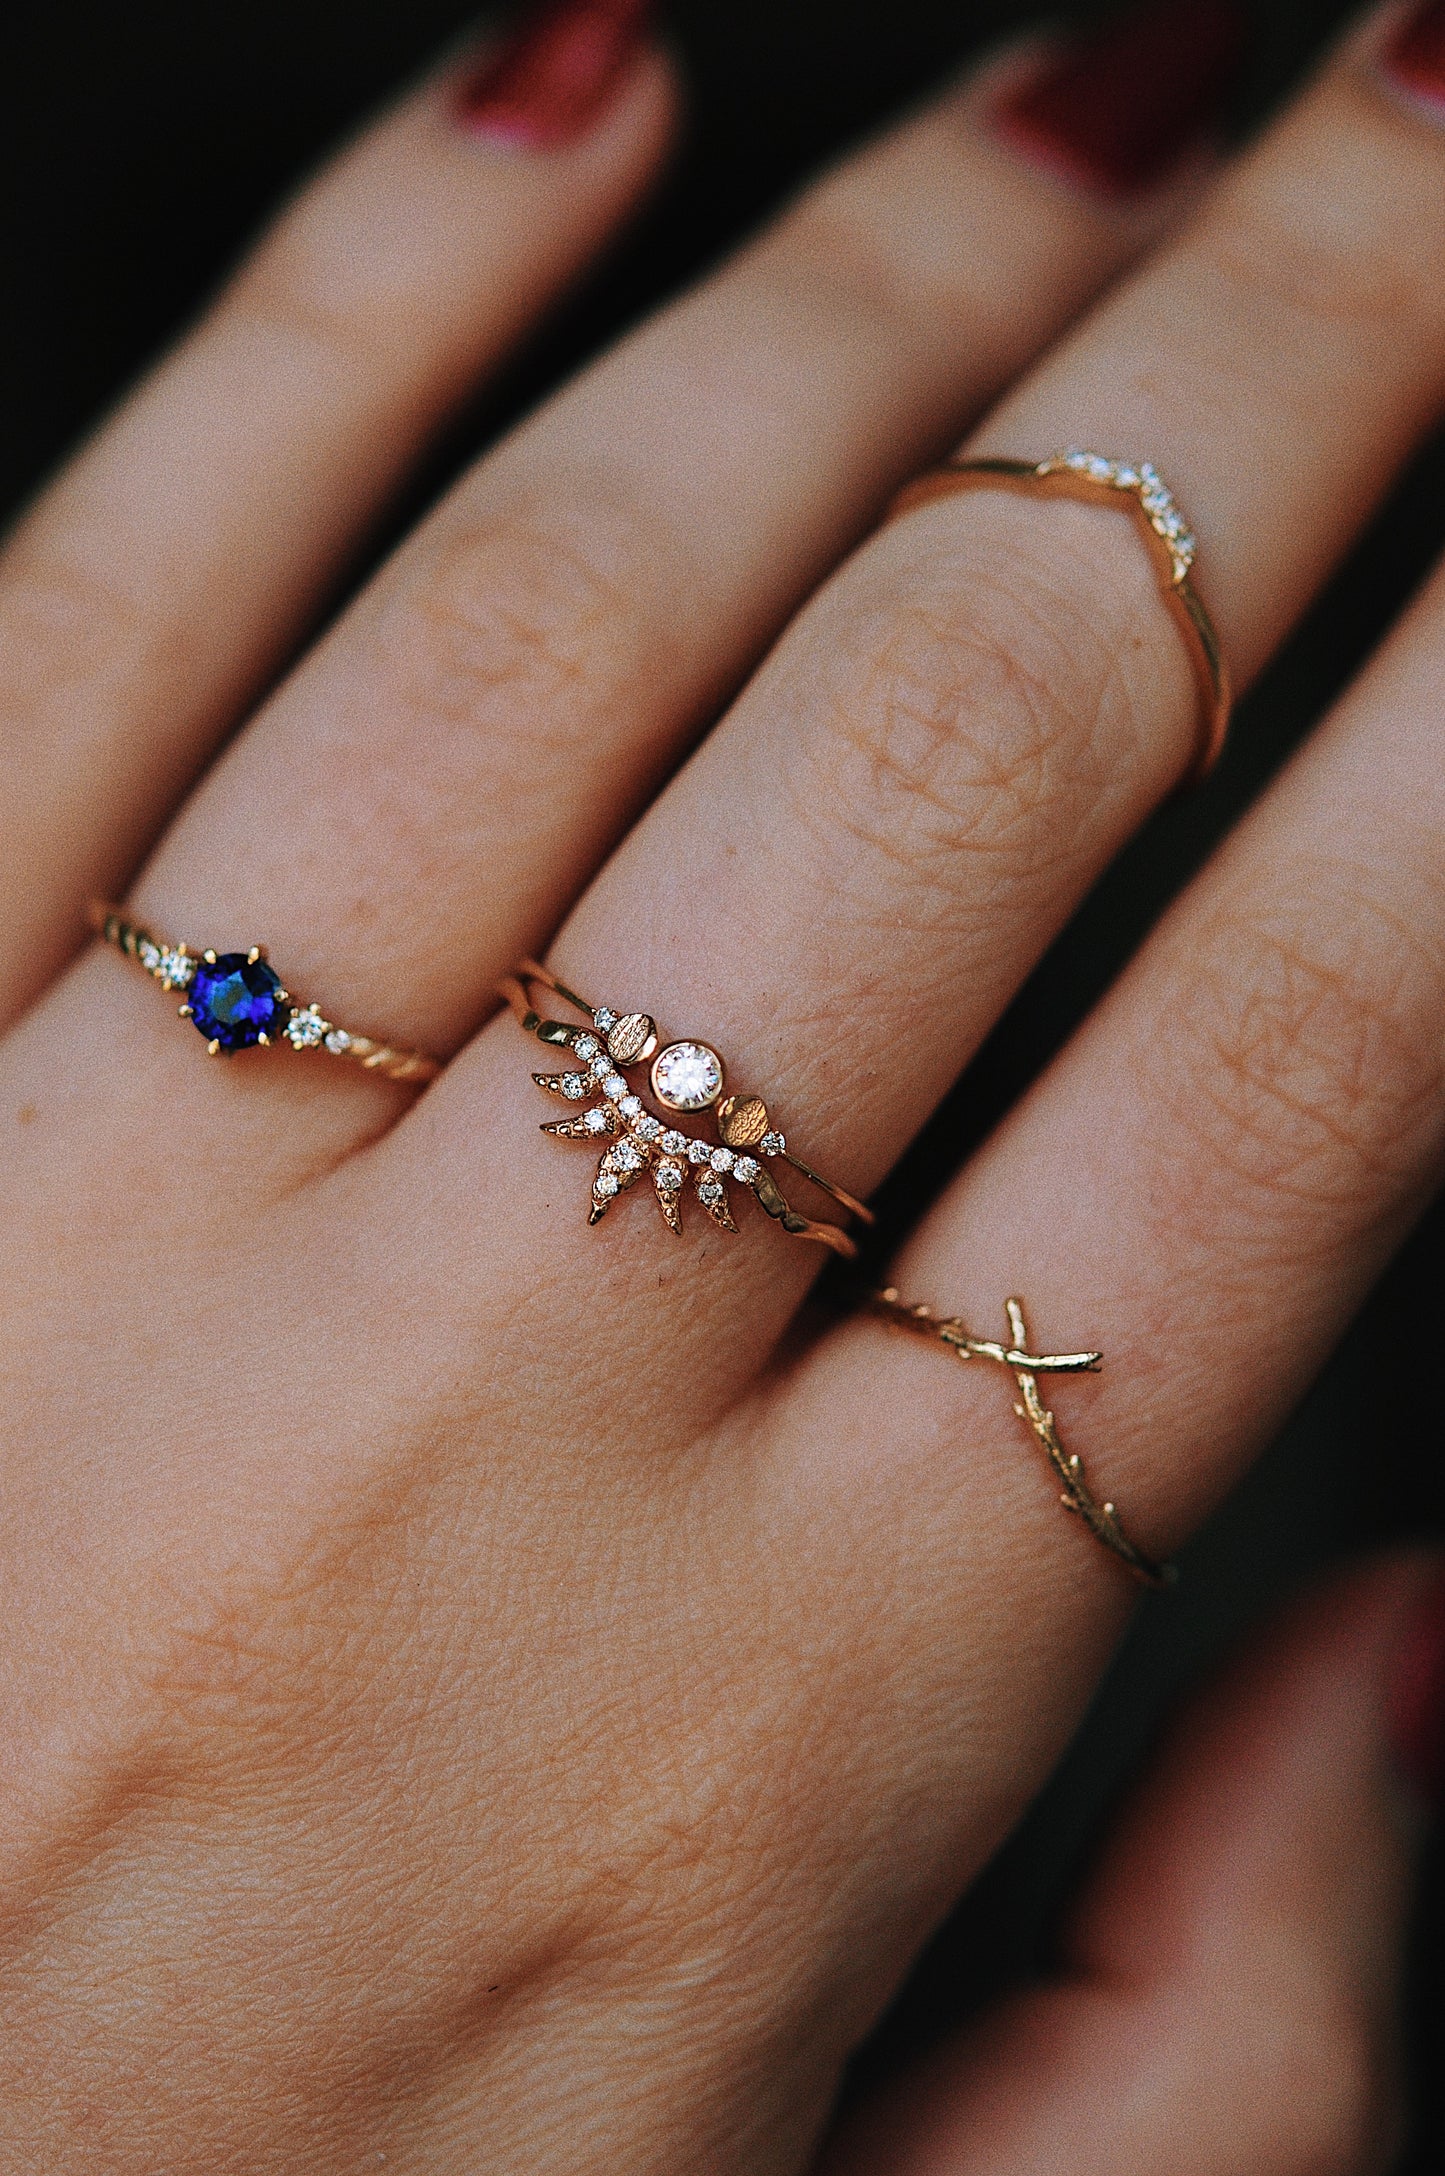 Baby Cosmic Witch Ring